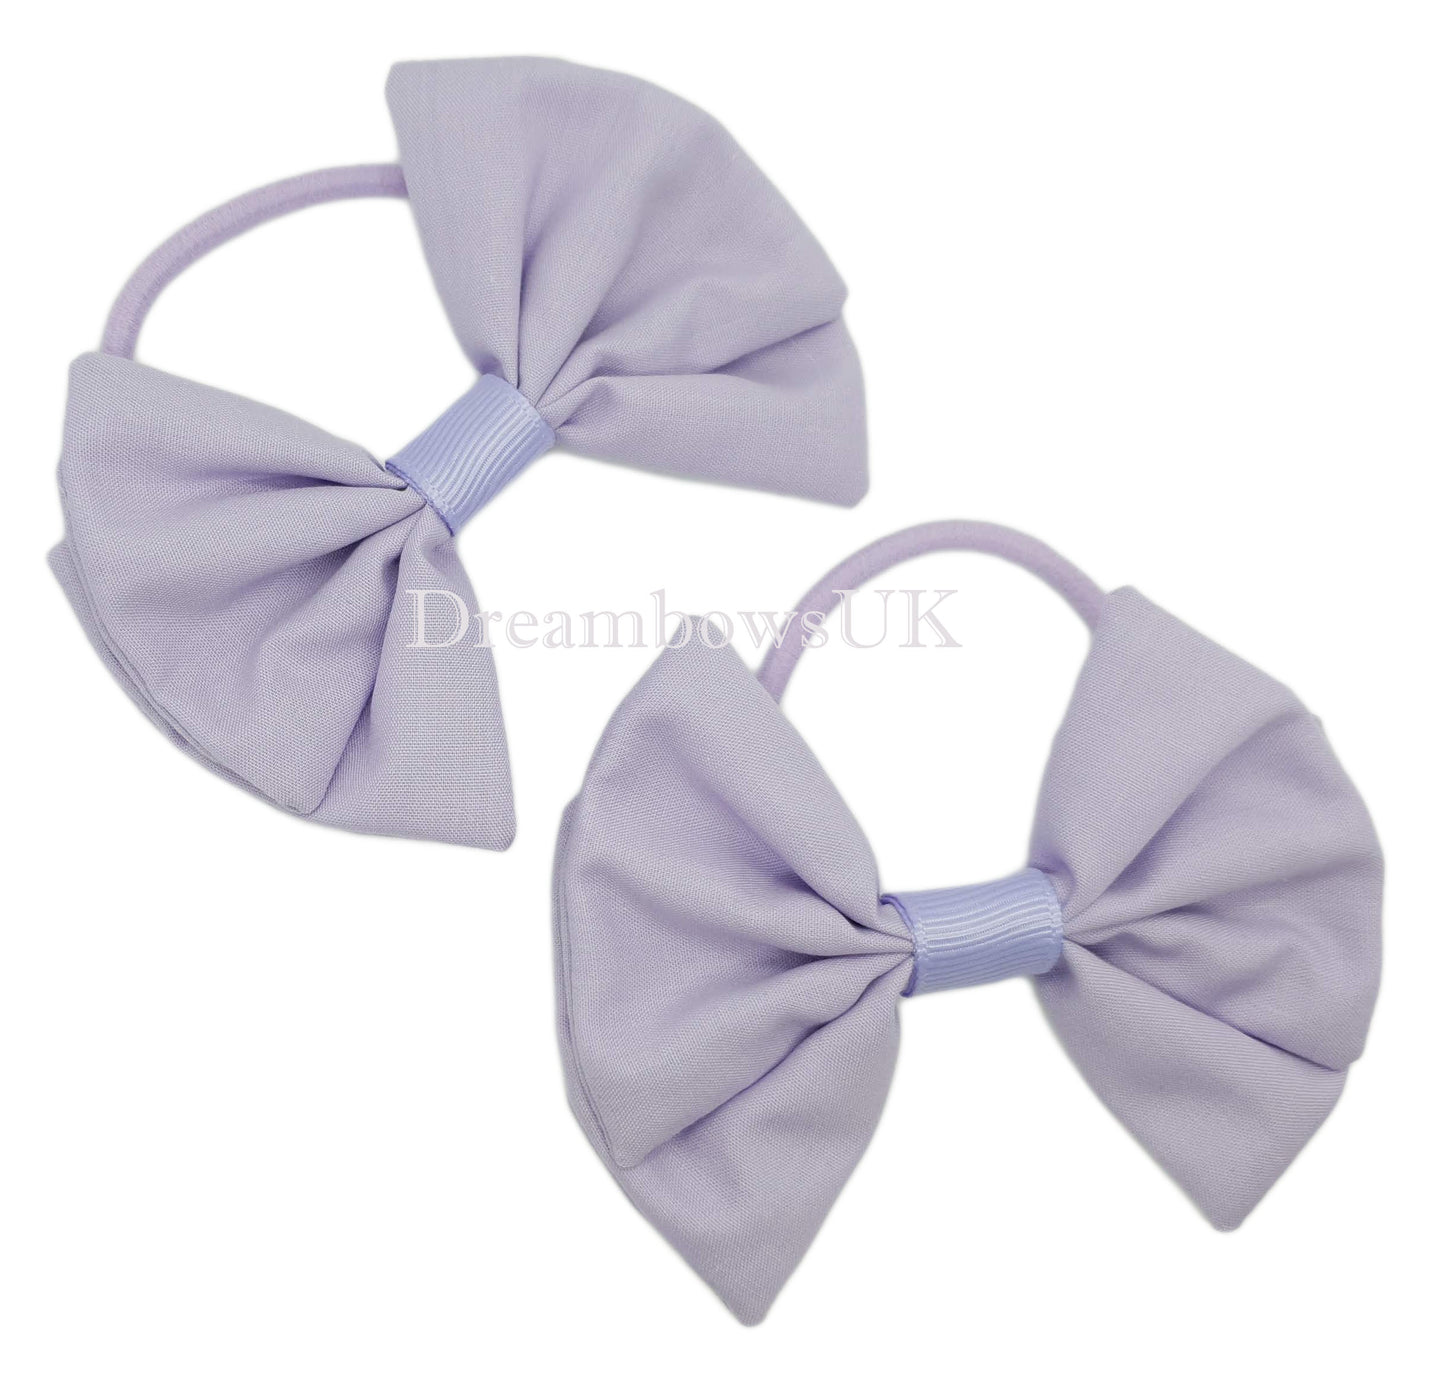 Girls lilac hair bows on thick hair ties